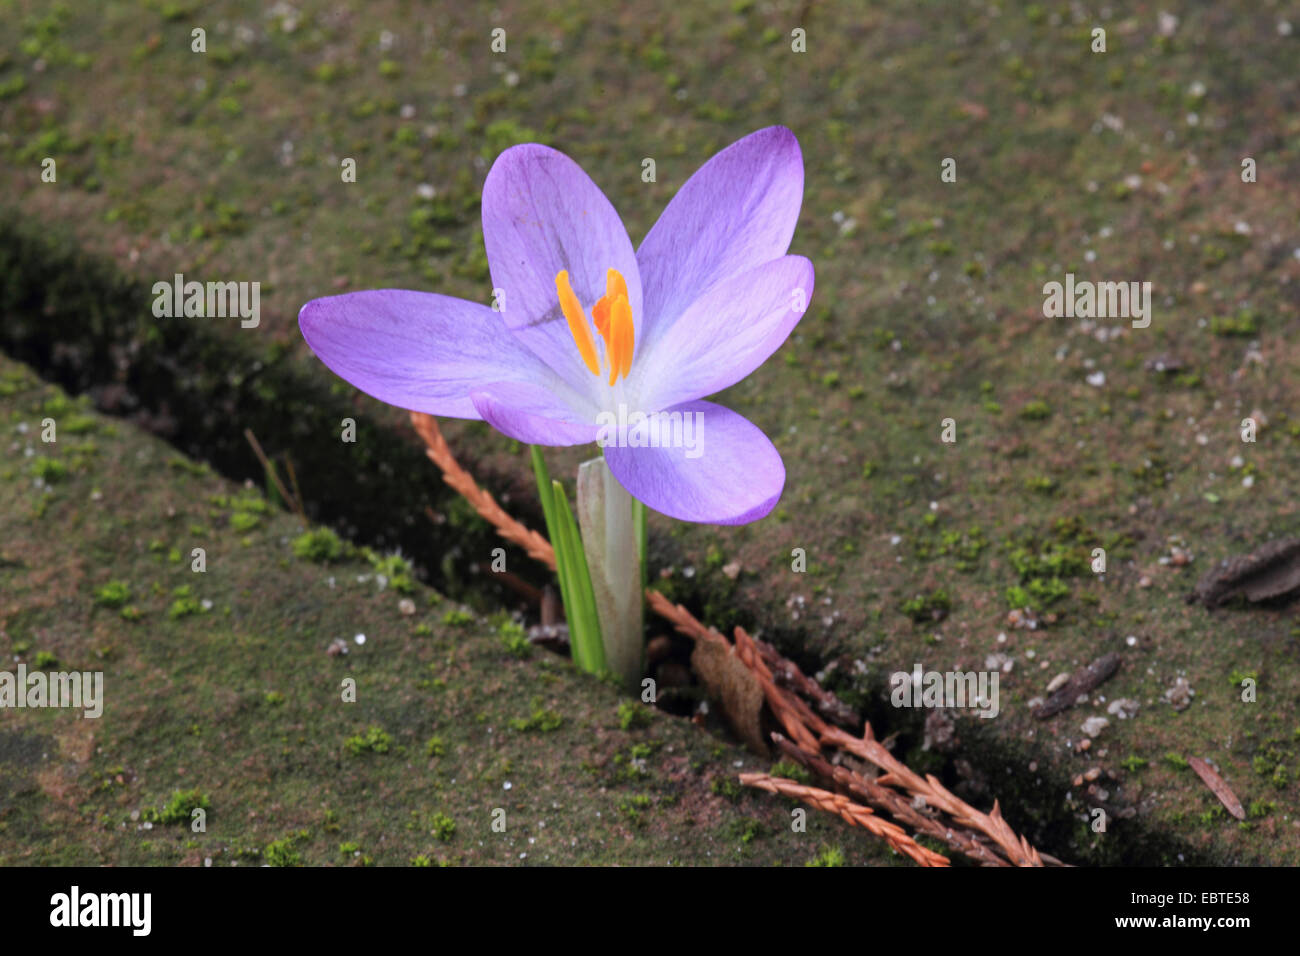 Early Crocus (Crocus tommasinianus), naturalized crocus in a pavement joint, Germany Stock Photo